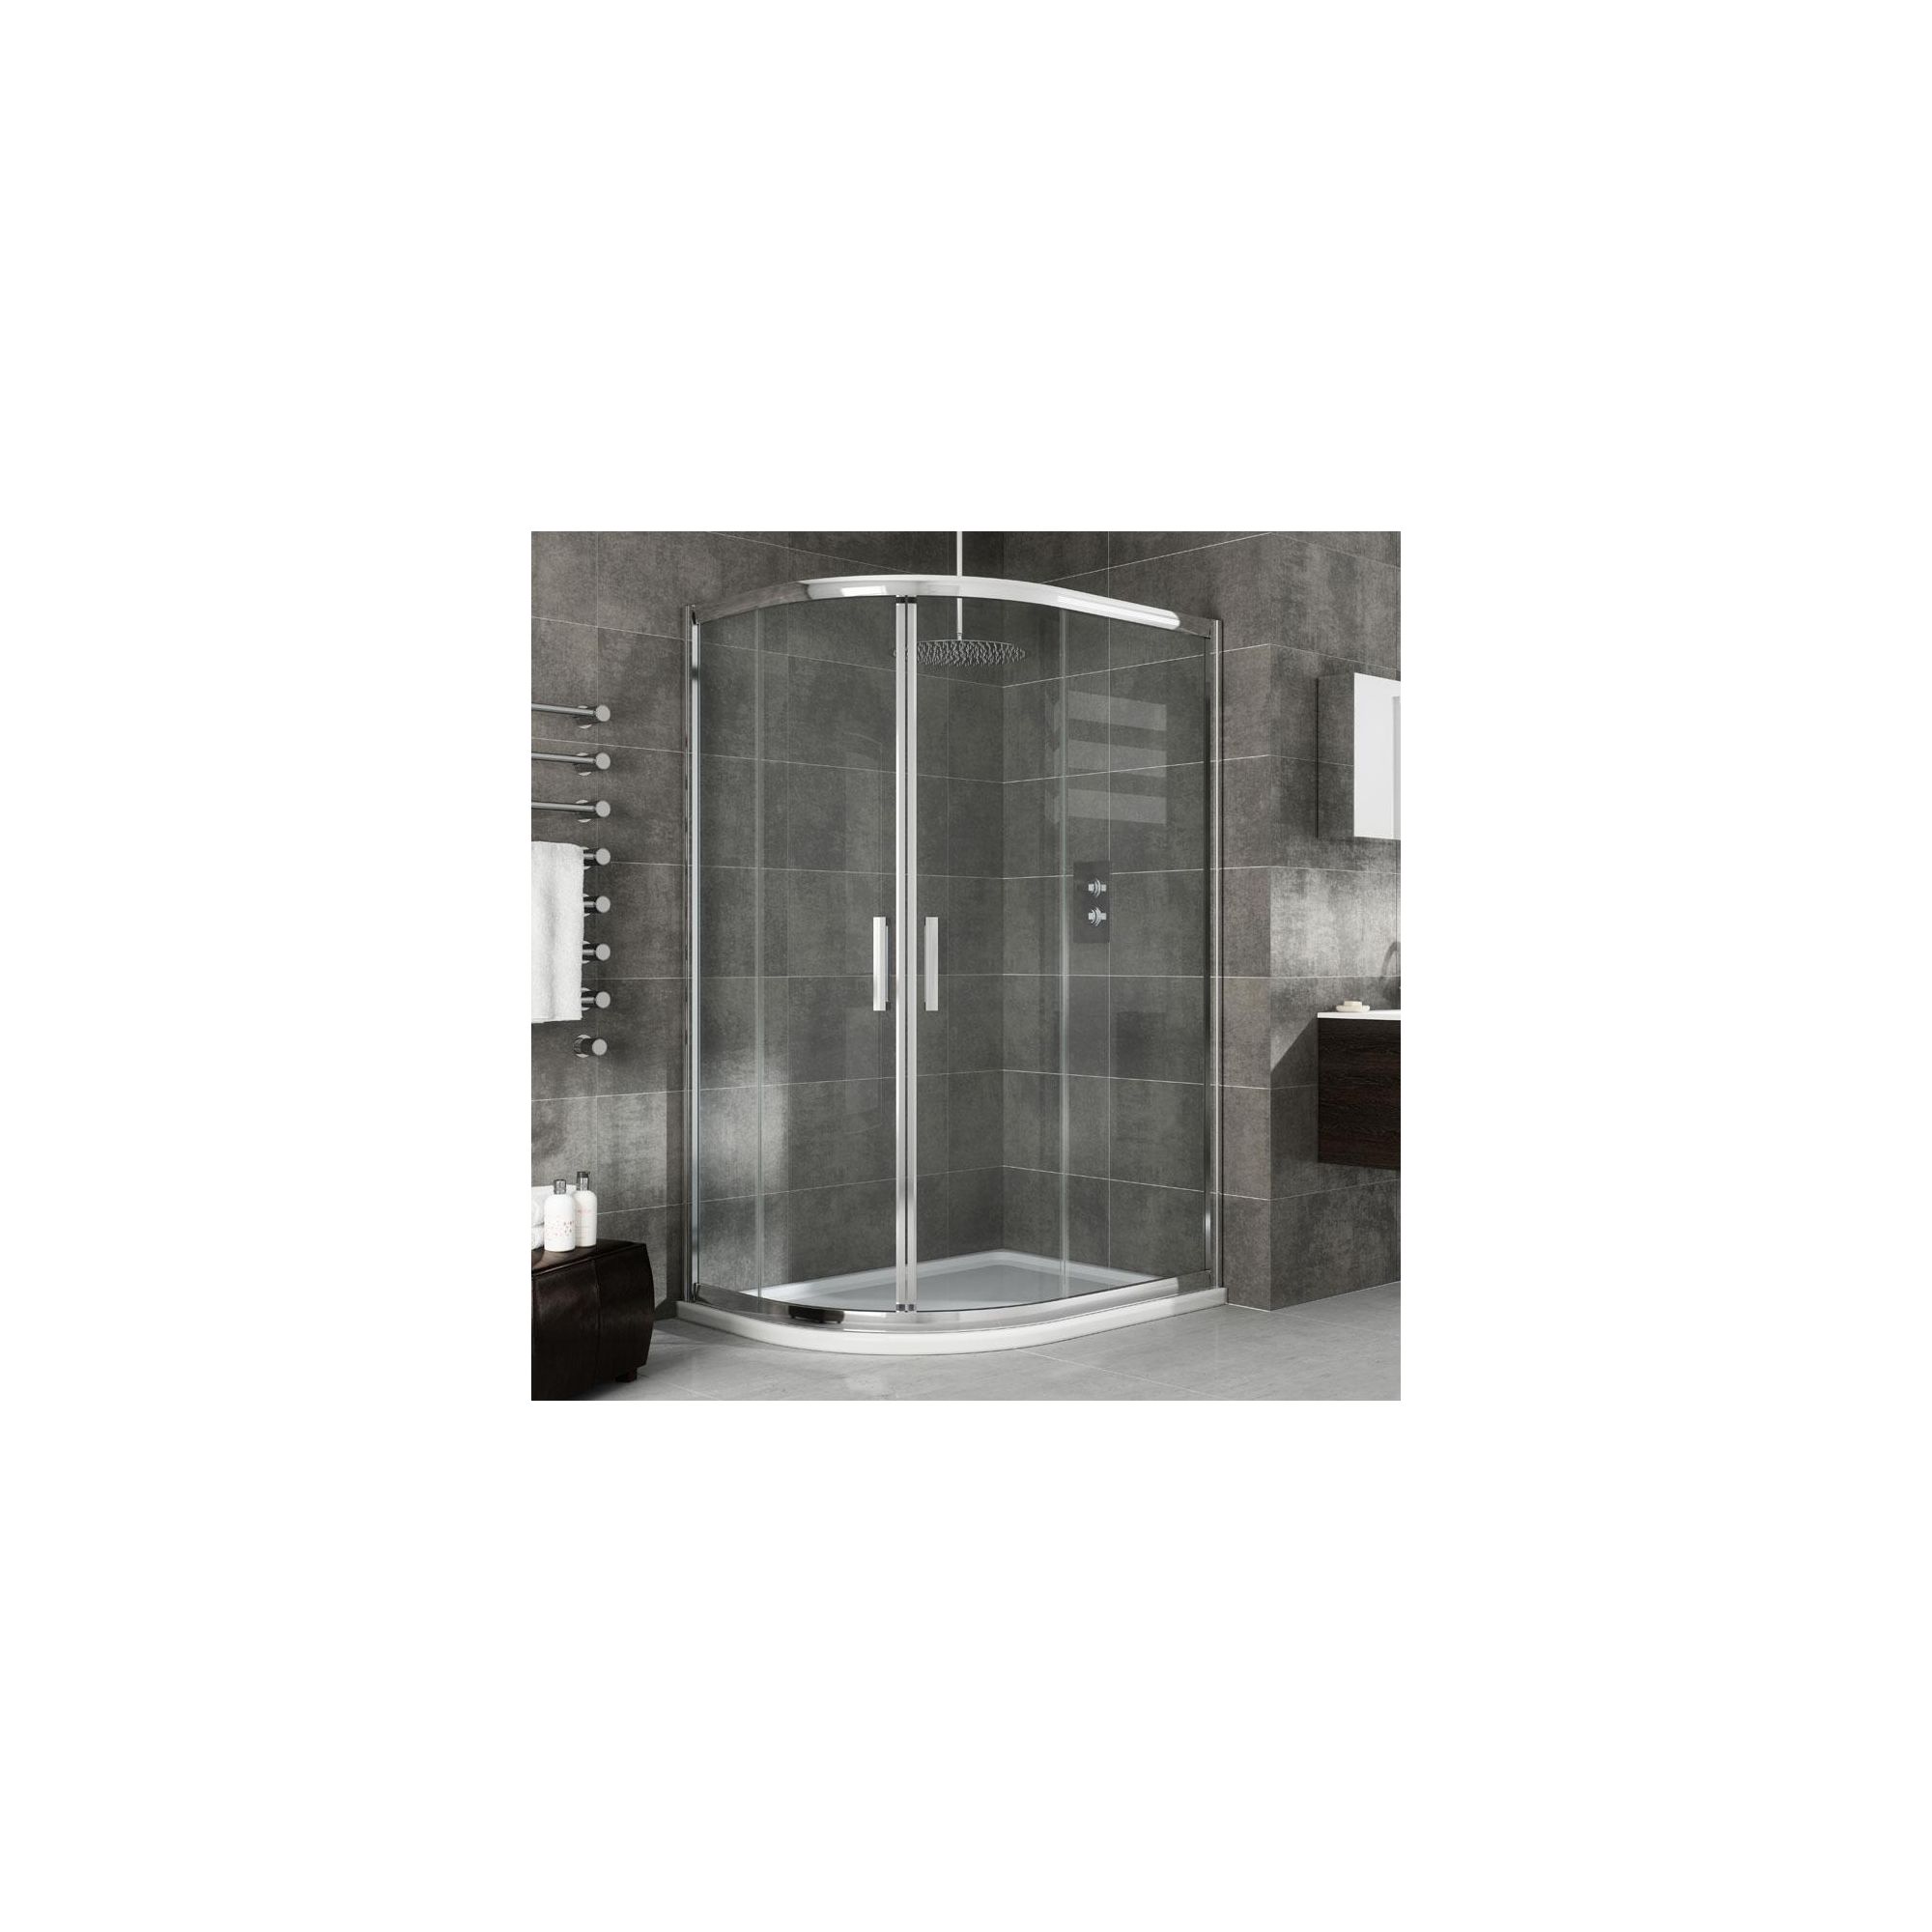 Elemis Eternity Offset Quadrant Shower Enclosure, 1200mm x 800mm, 8mm Glass, Low Profile Tray, Right Handed at Tesco Direct